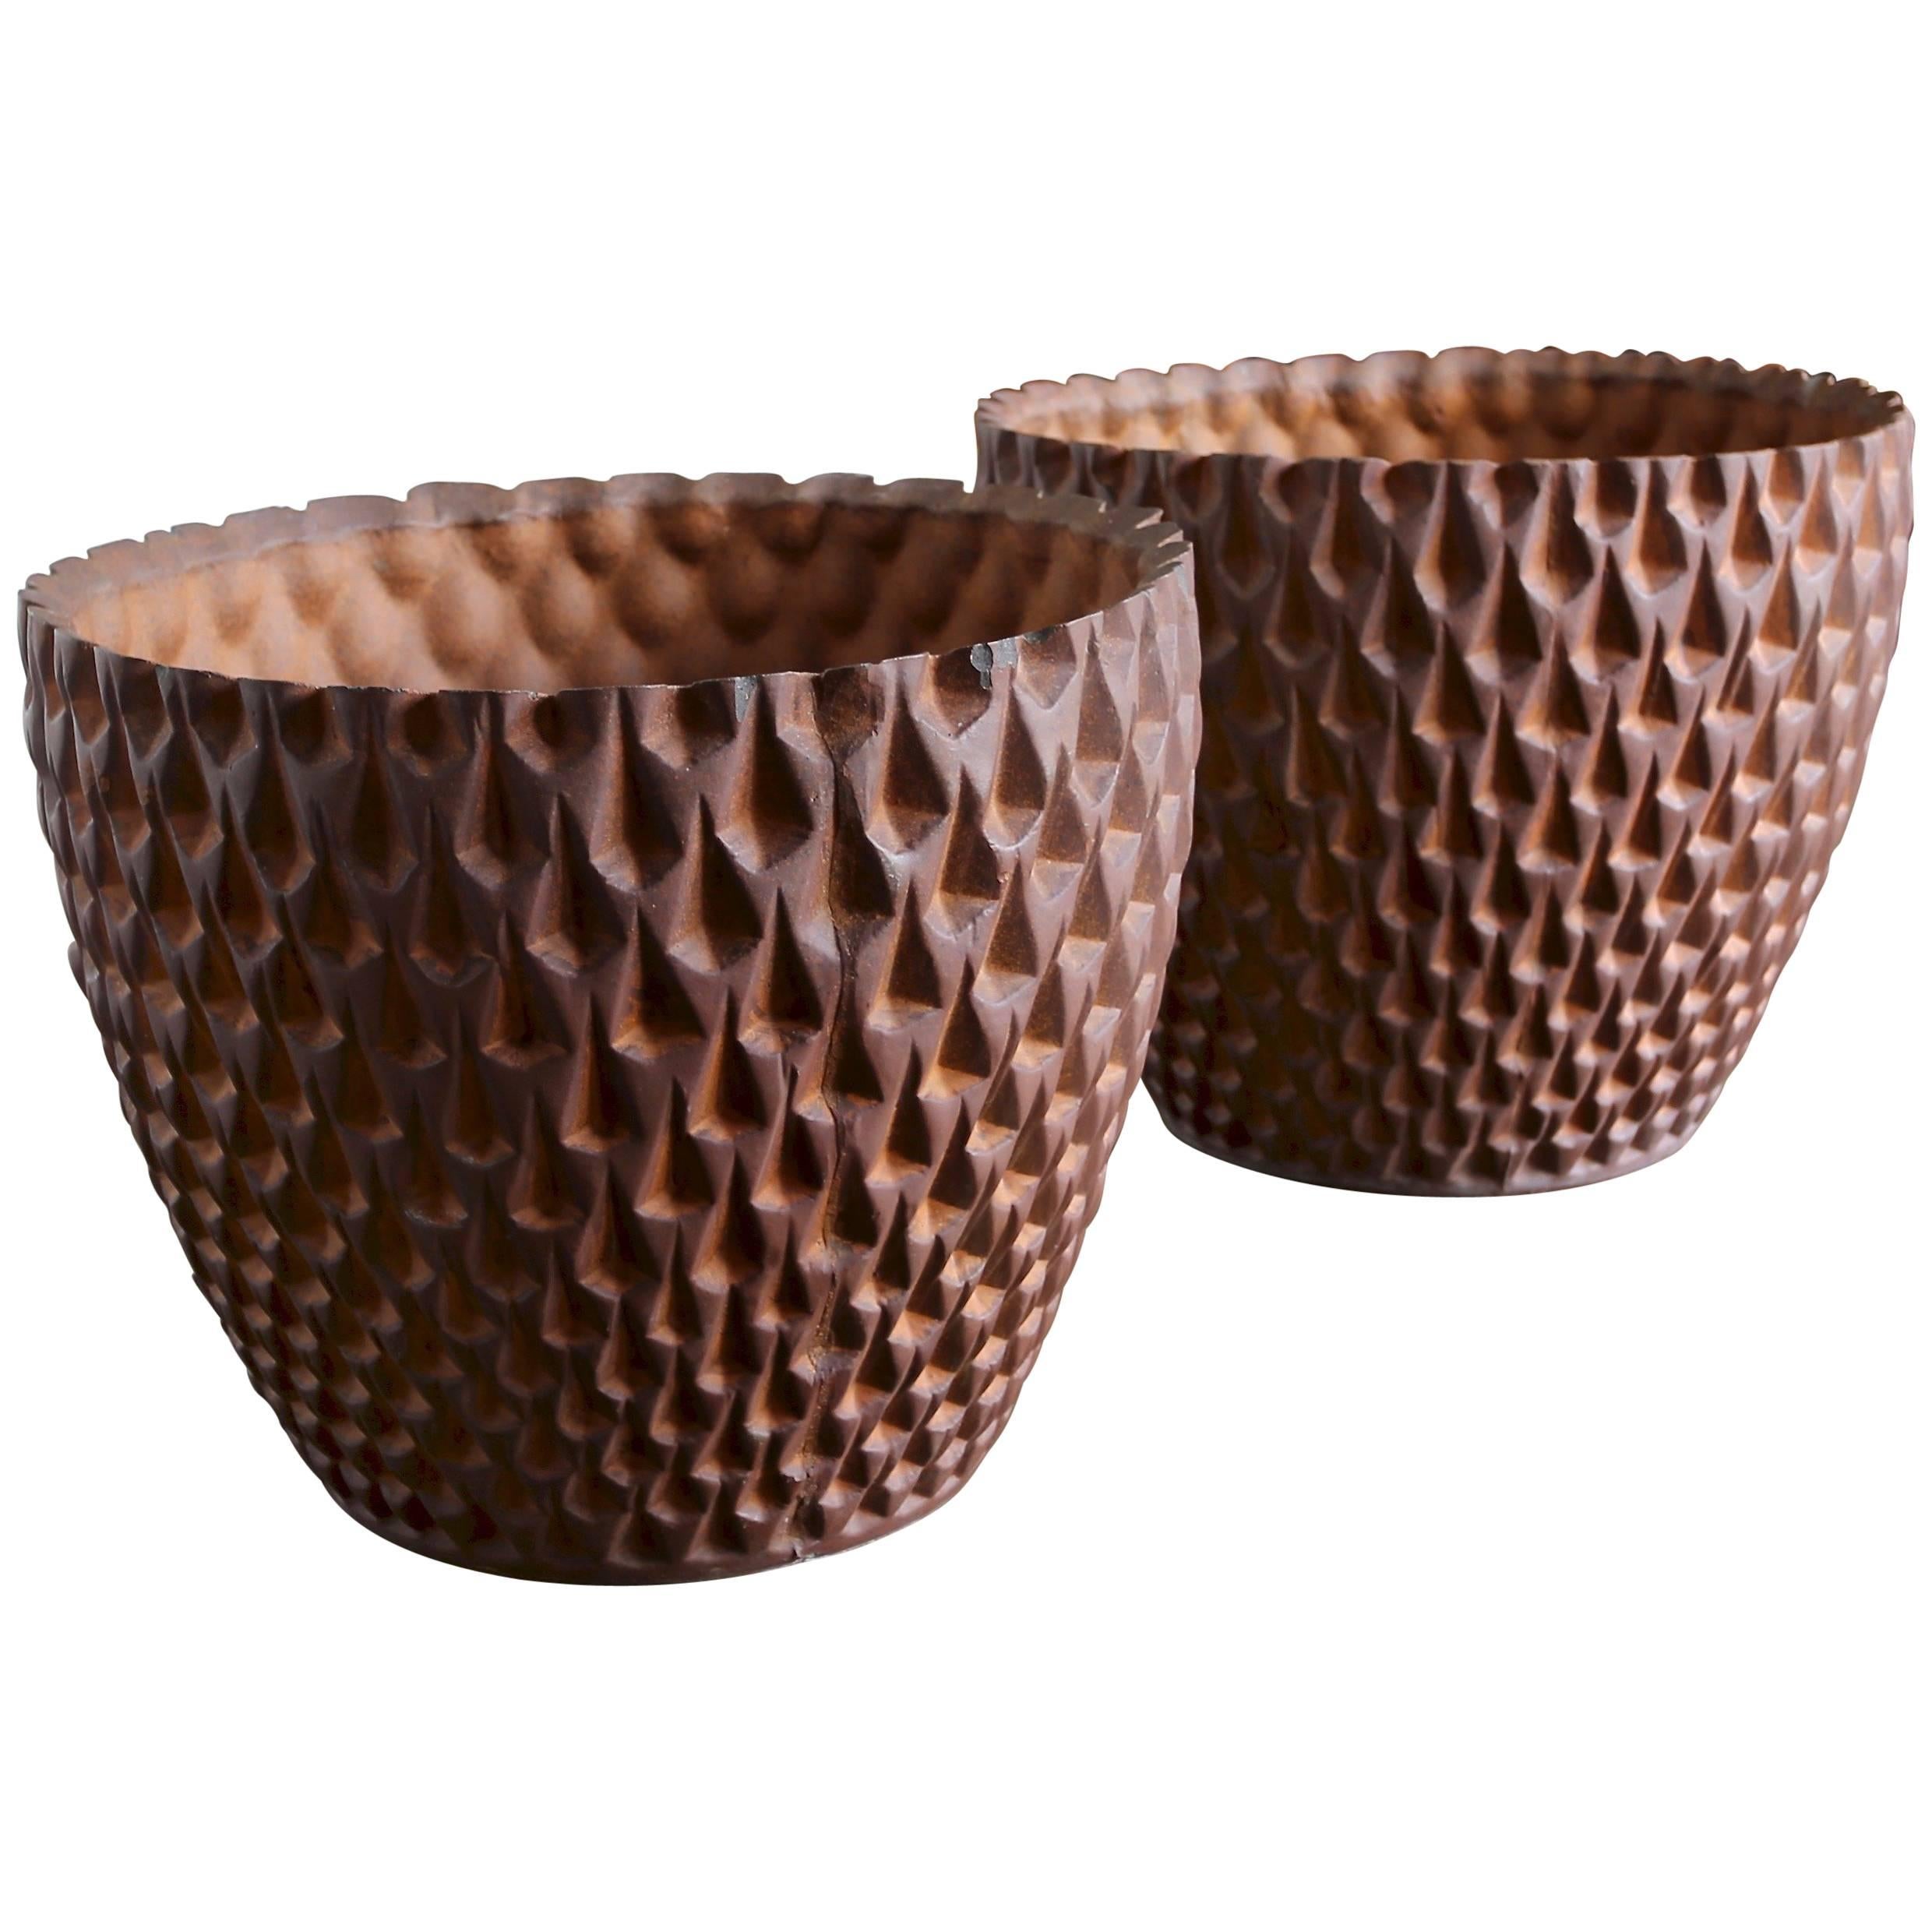 Phoenix Planters by David Cressey for Architectural Pottery